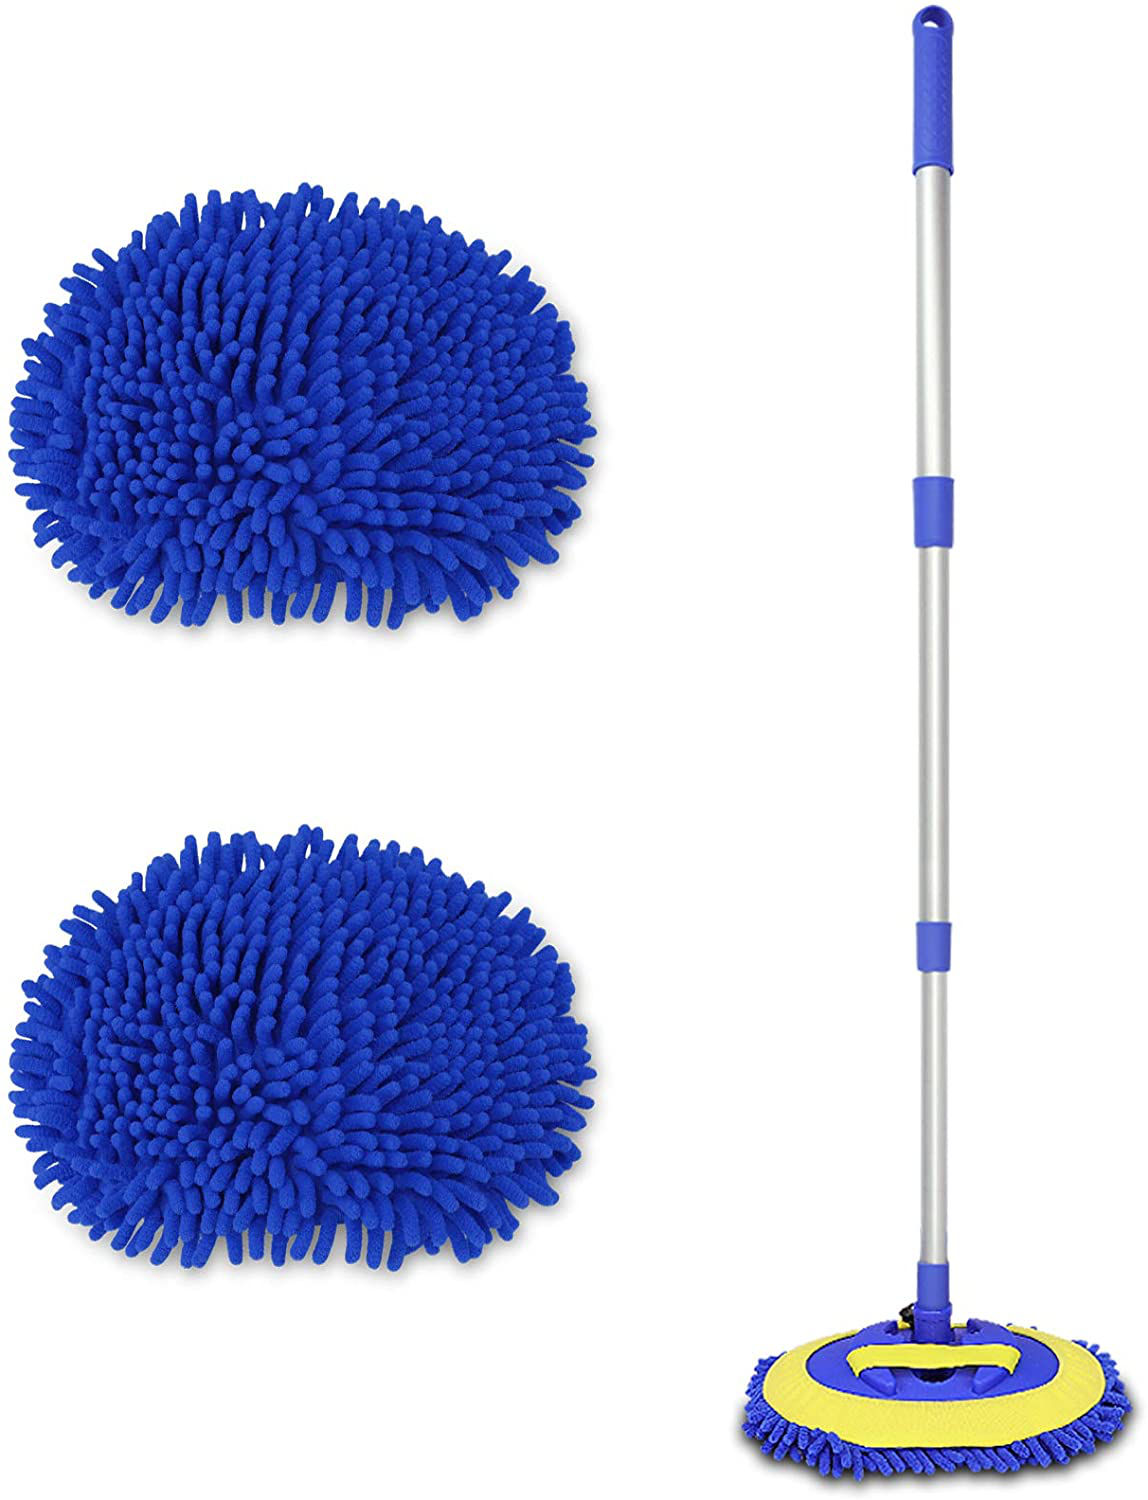 2 in 1 Chenille Microfiber Car Wash Brush Mop Mitt with 45" Aluminum Alloy Long Handle, Car Cleaning Kit Brush Duster, Not Hurt Paint Scratch Free Cleaning Tool Dust Collector Supply for Washing Truck